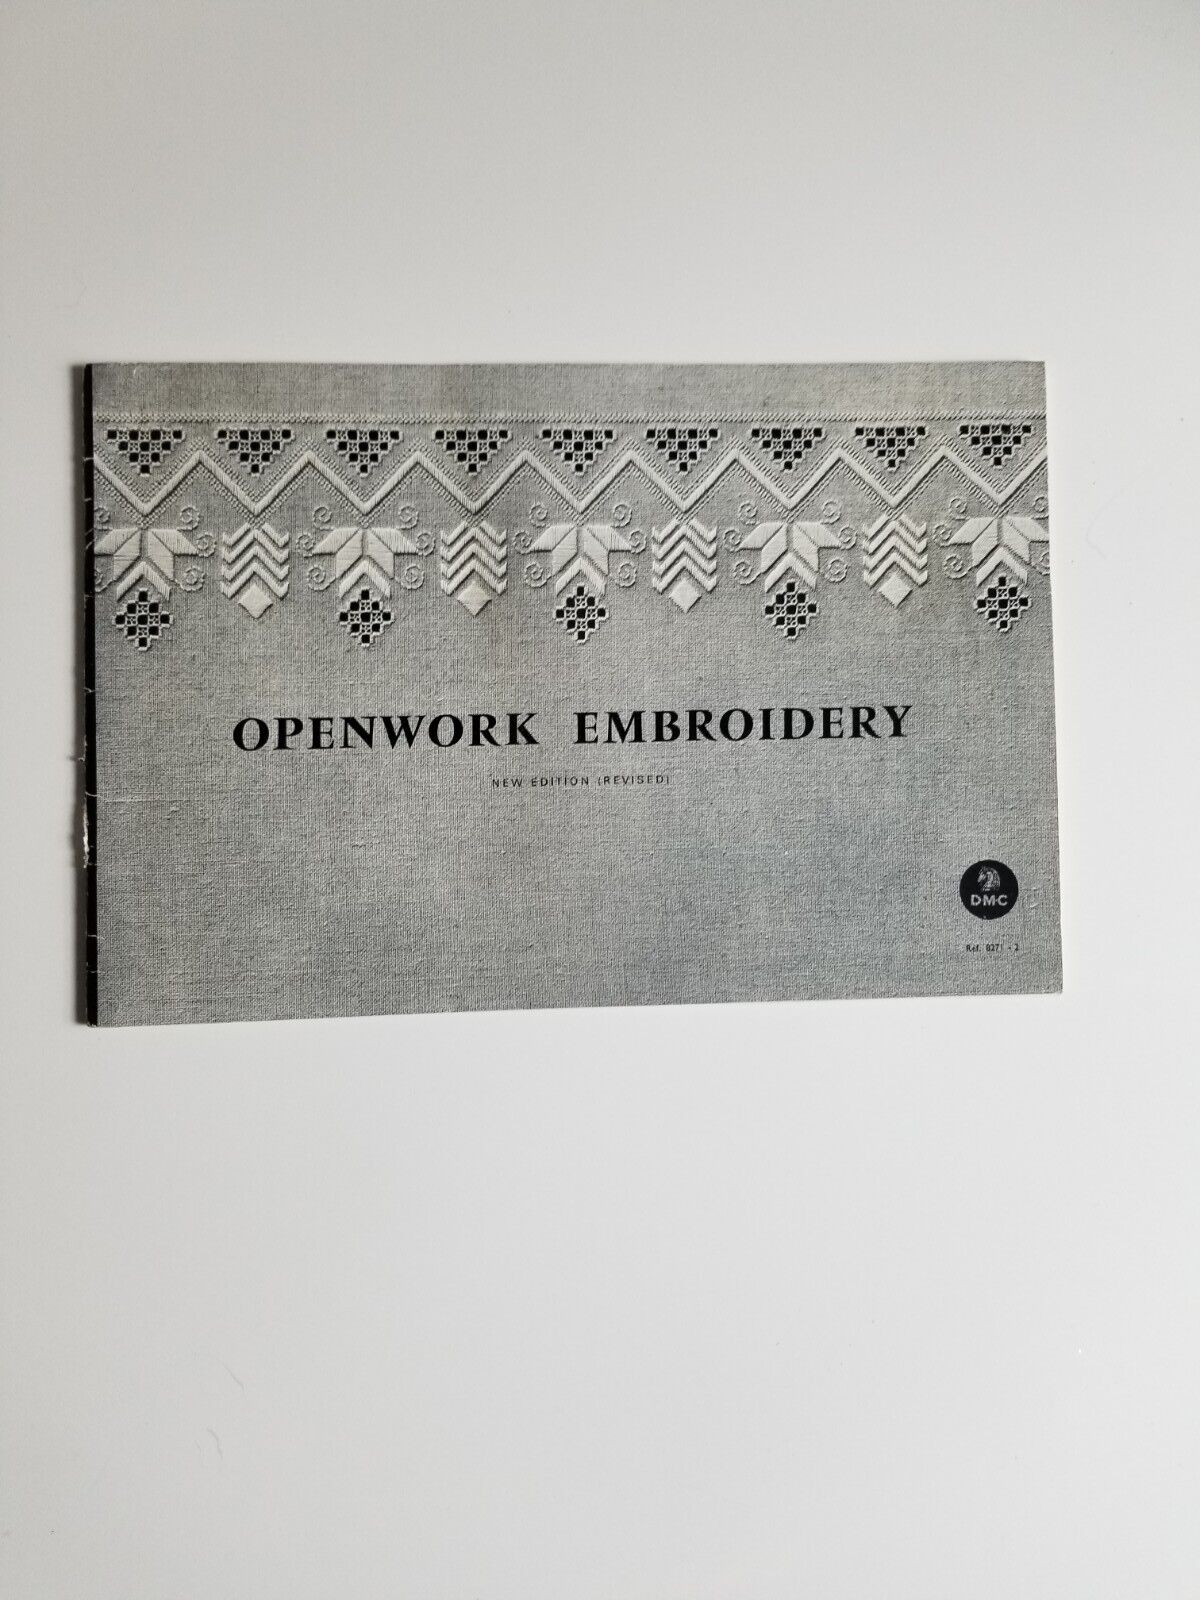 Dmc Openwork Embroidery Paperback Vintage Guide